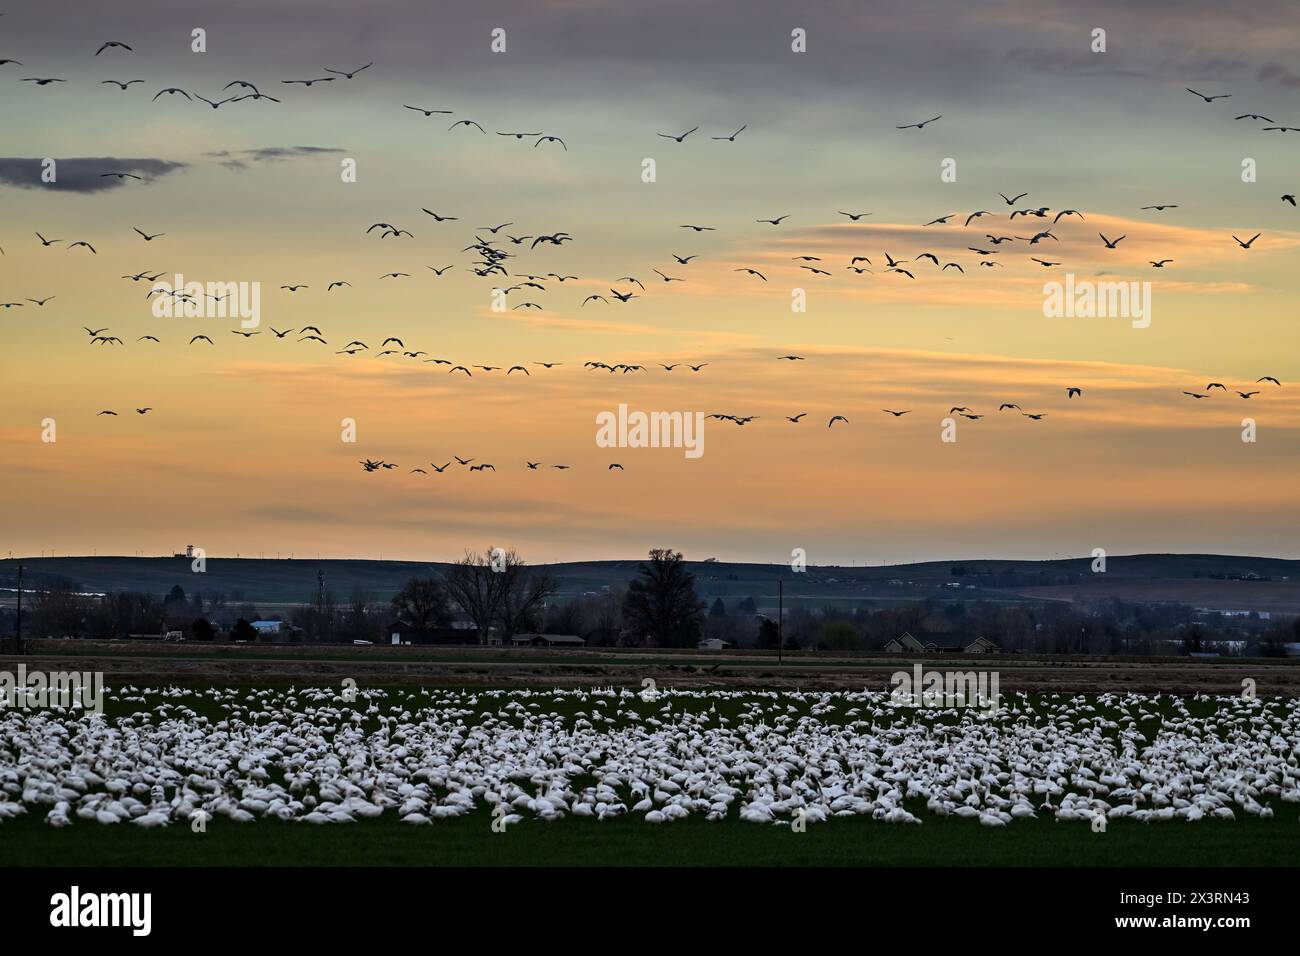 Many snow geese in flight and on the ground Stock Photo